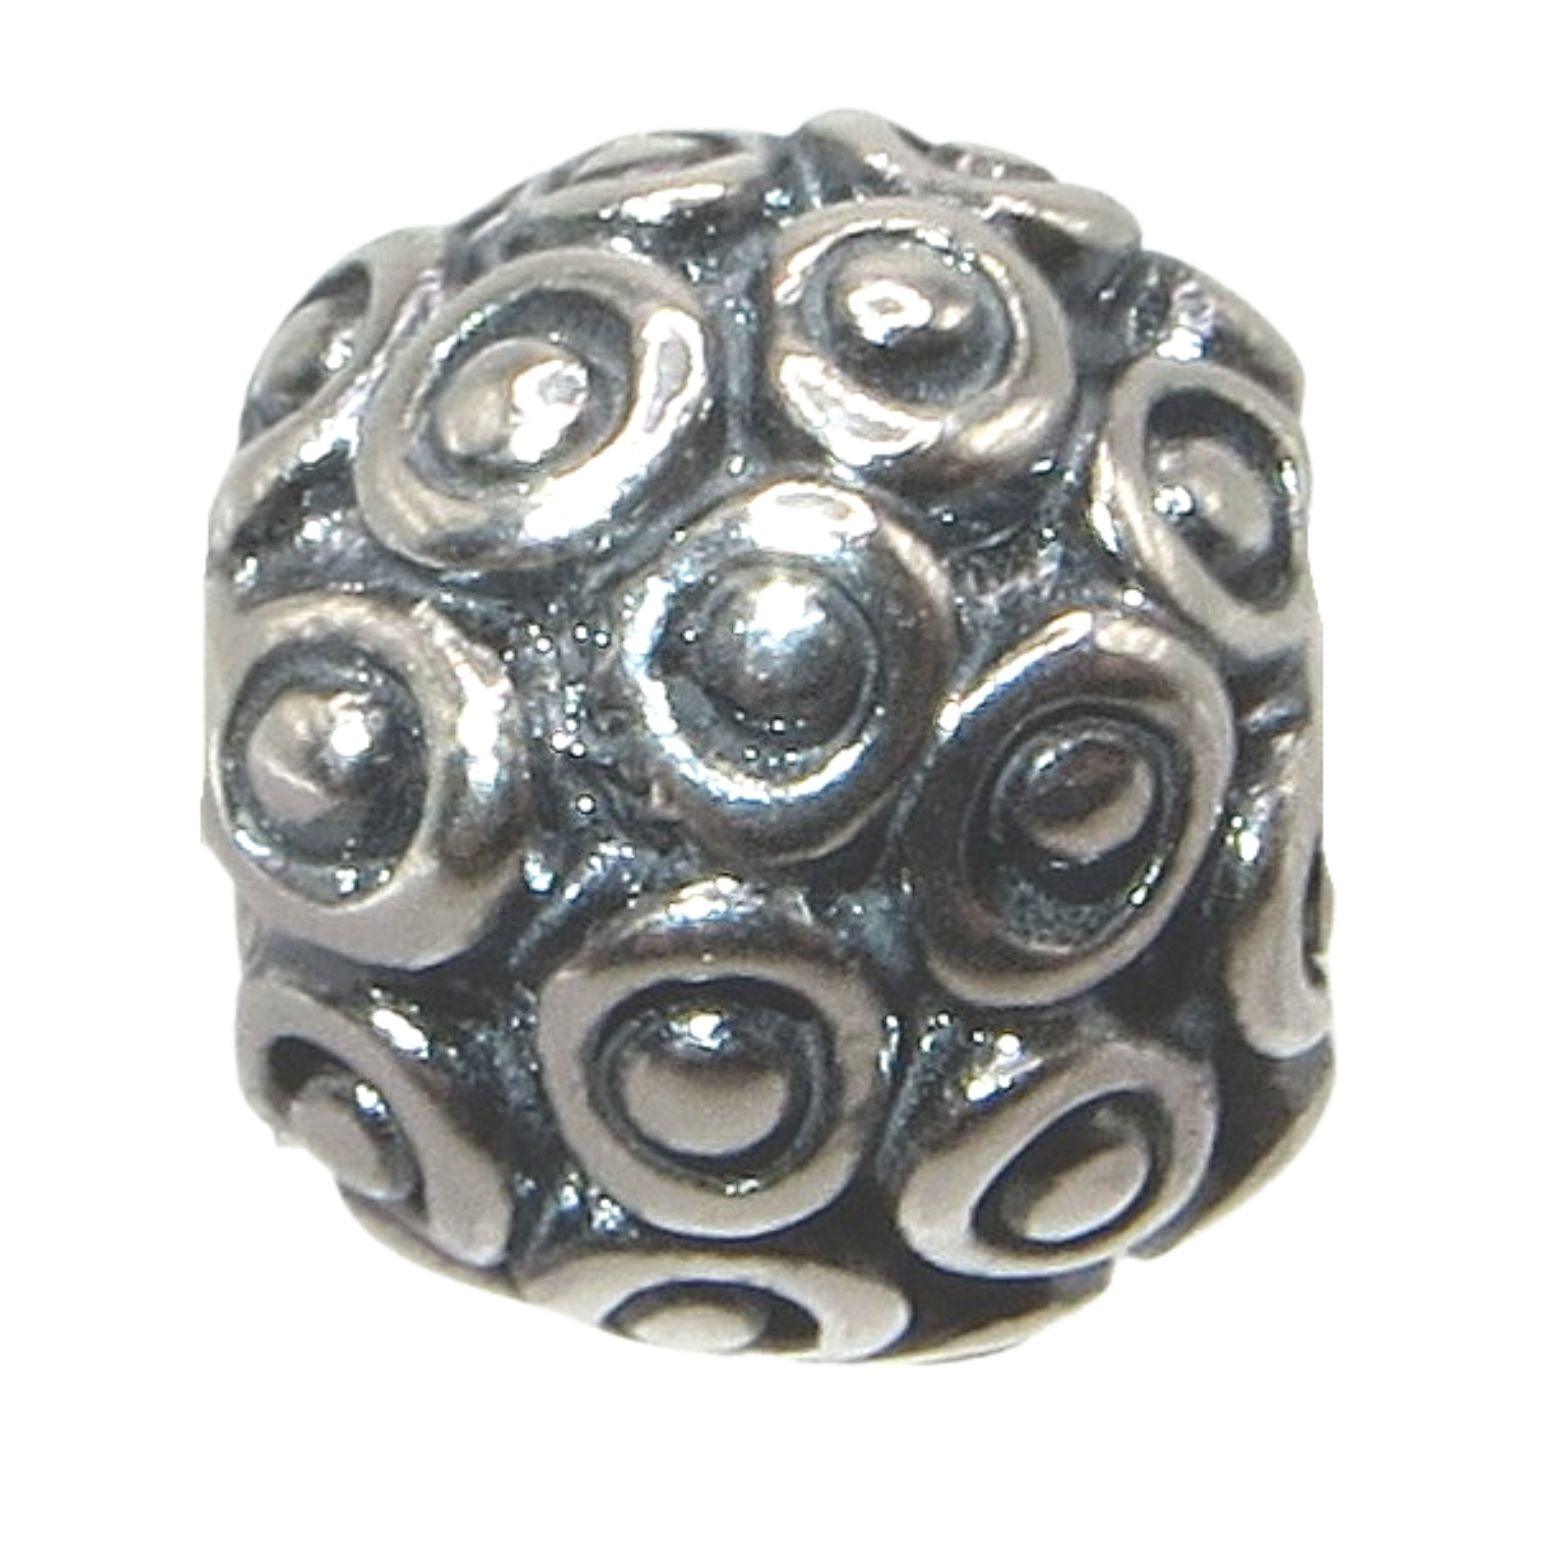 PANDORA 790866 Celebration Circles and Dots - Oxidized Sterling Silver Ball Charm - Decorated with Circles and Dots - Women's - Charming Jilly